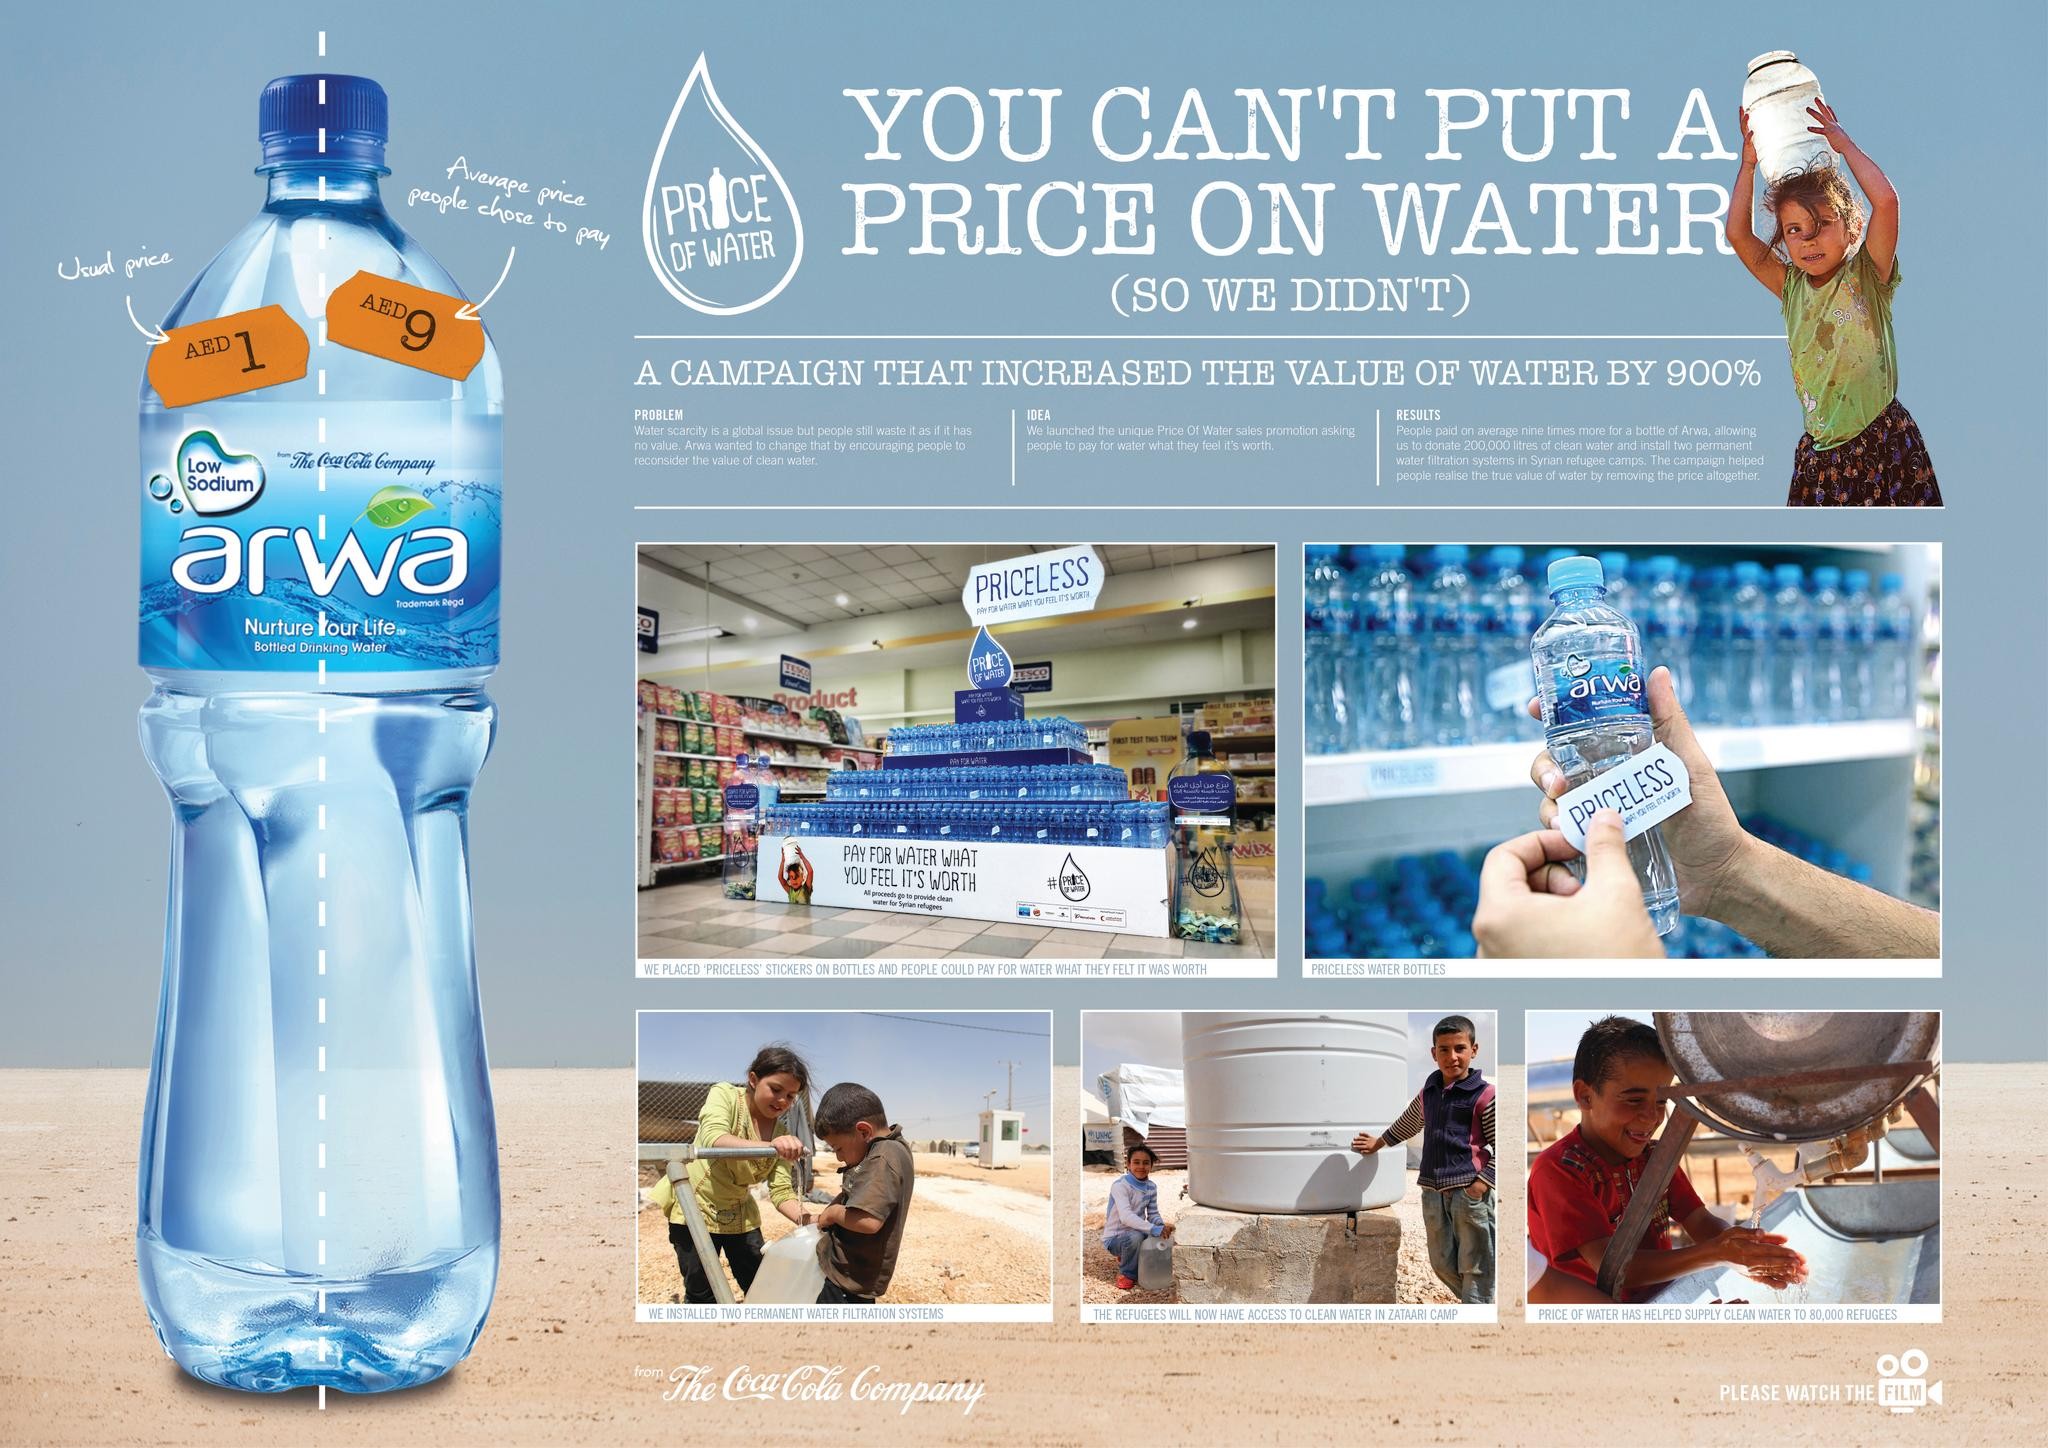 PRICE OF WATER